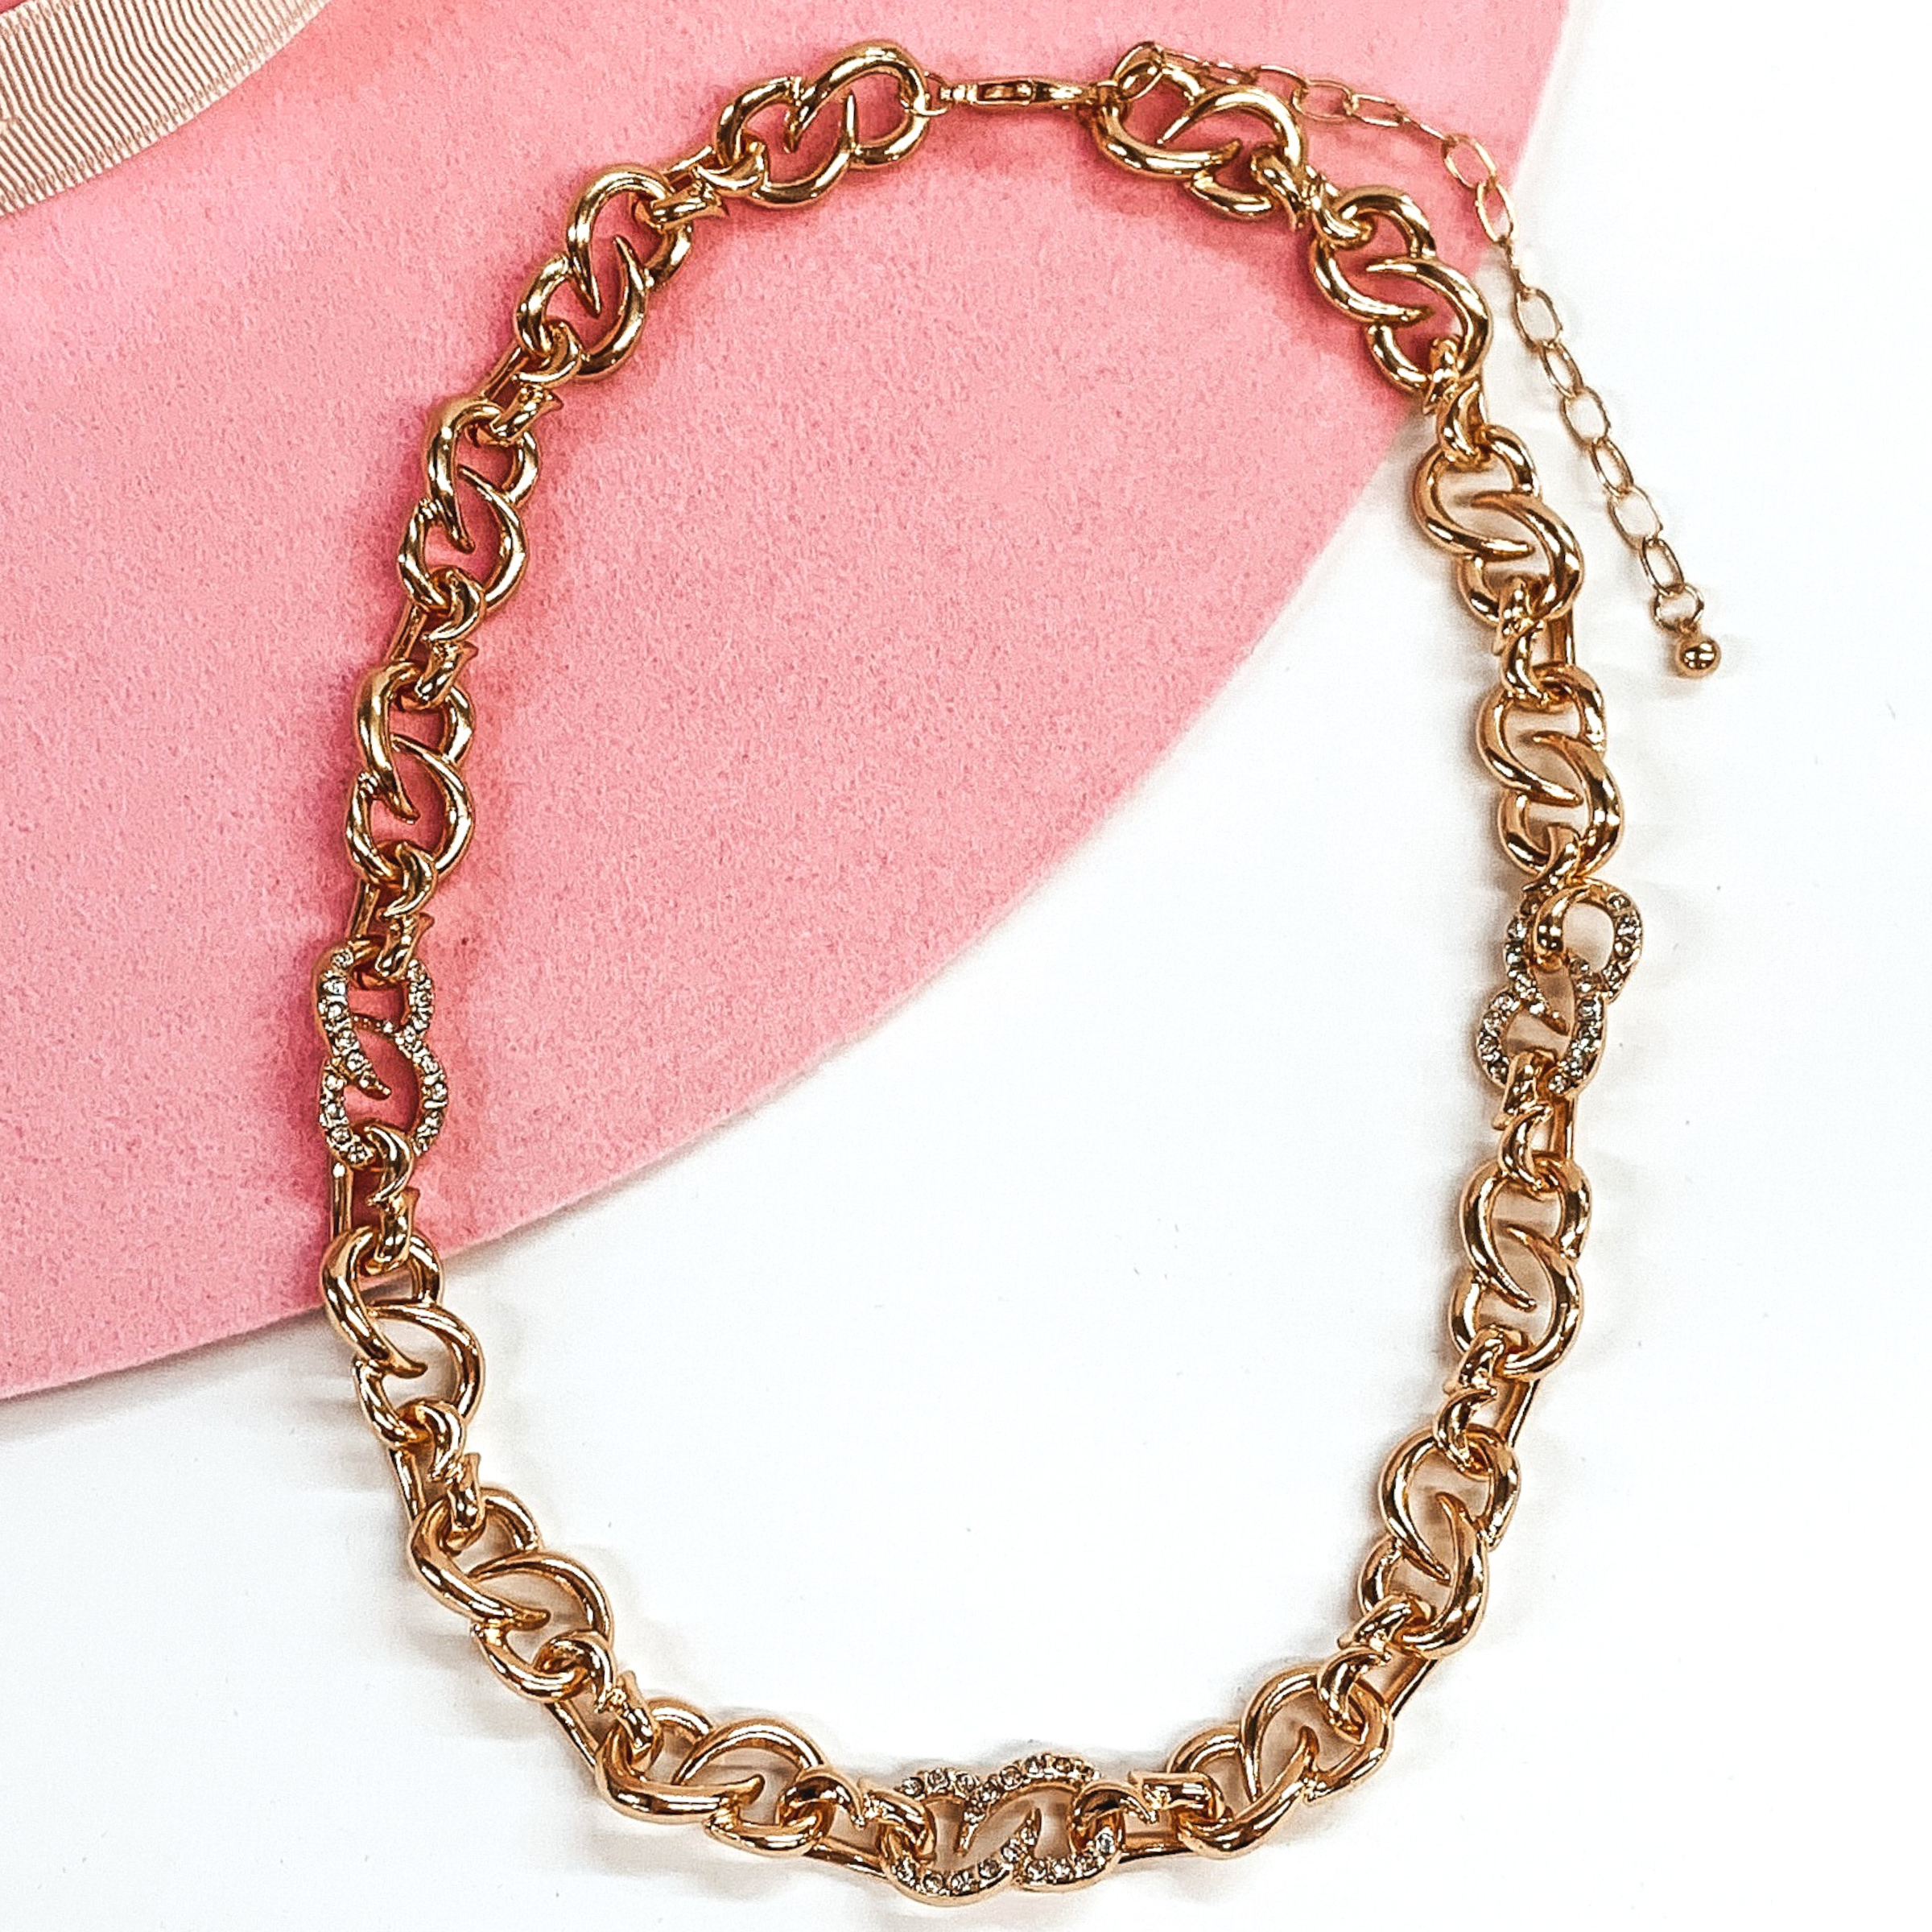 Thick gold infinity chain link necklace with three links that have clear crystals. this necklace is pictured on a white and pink background. 